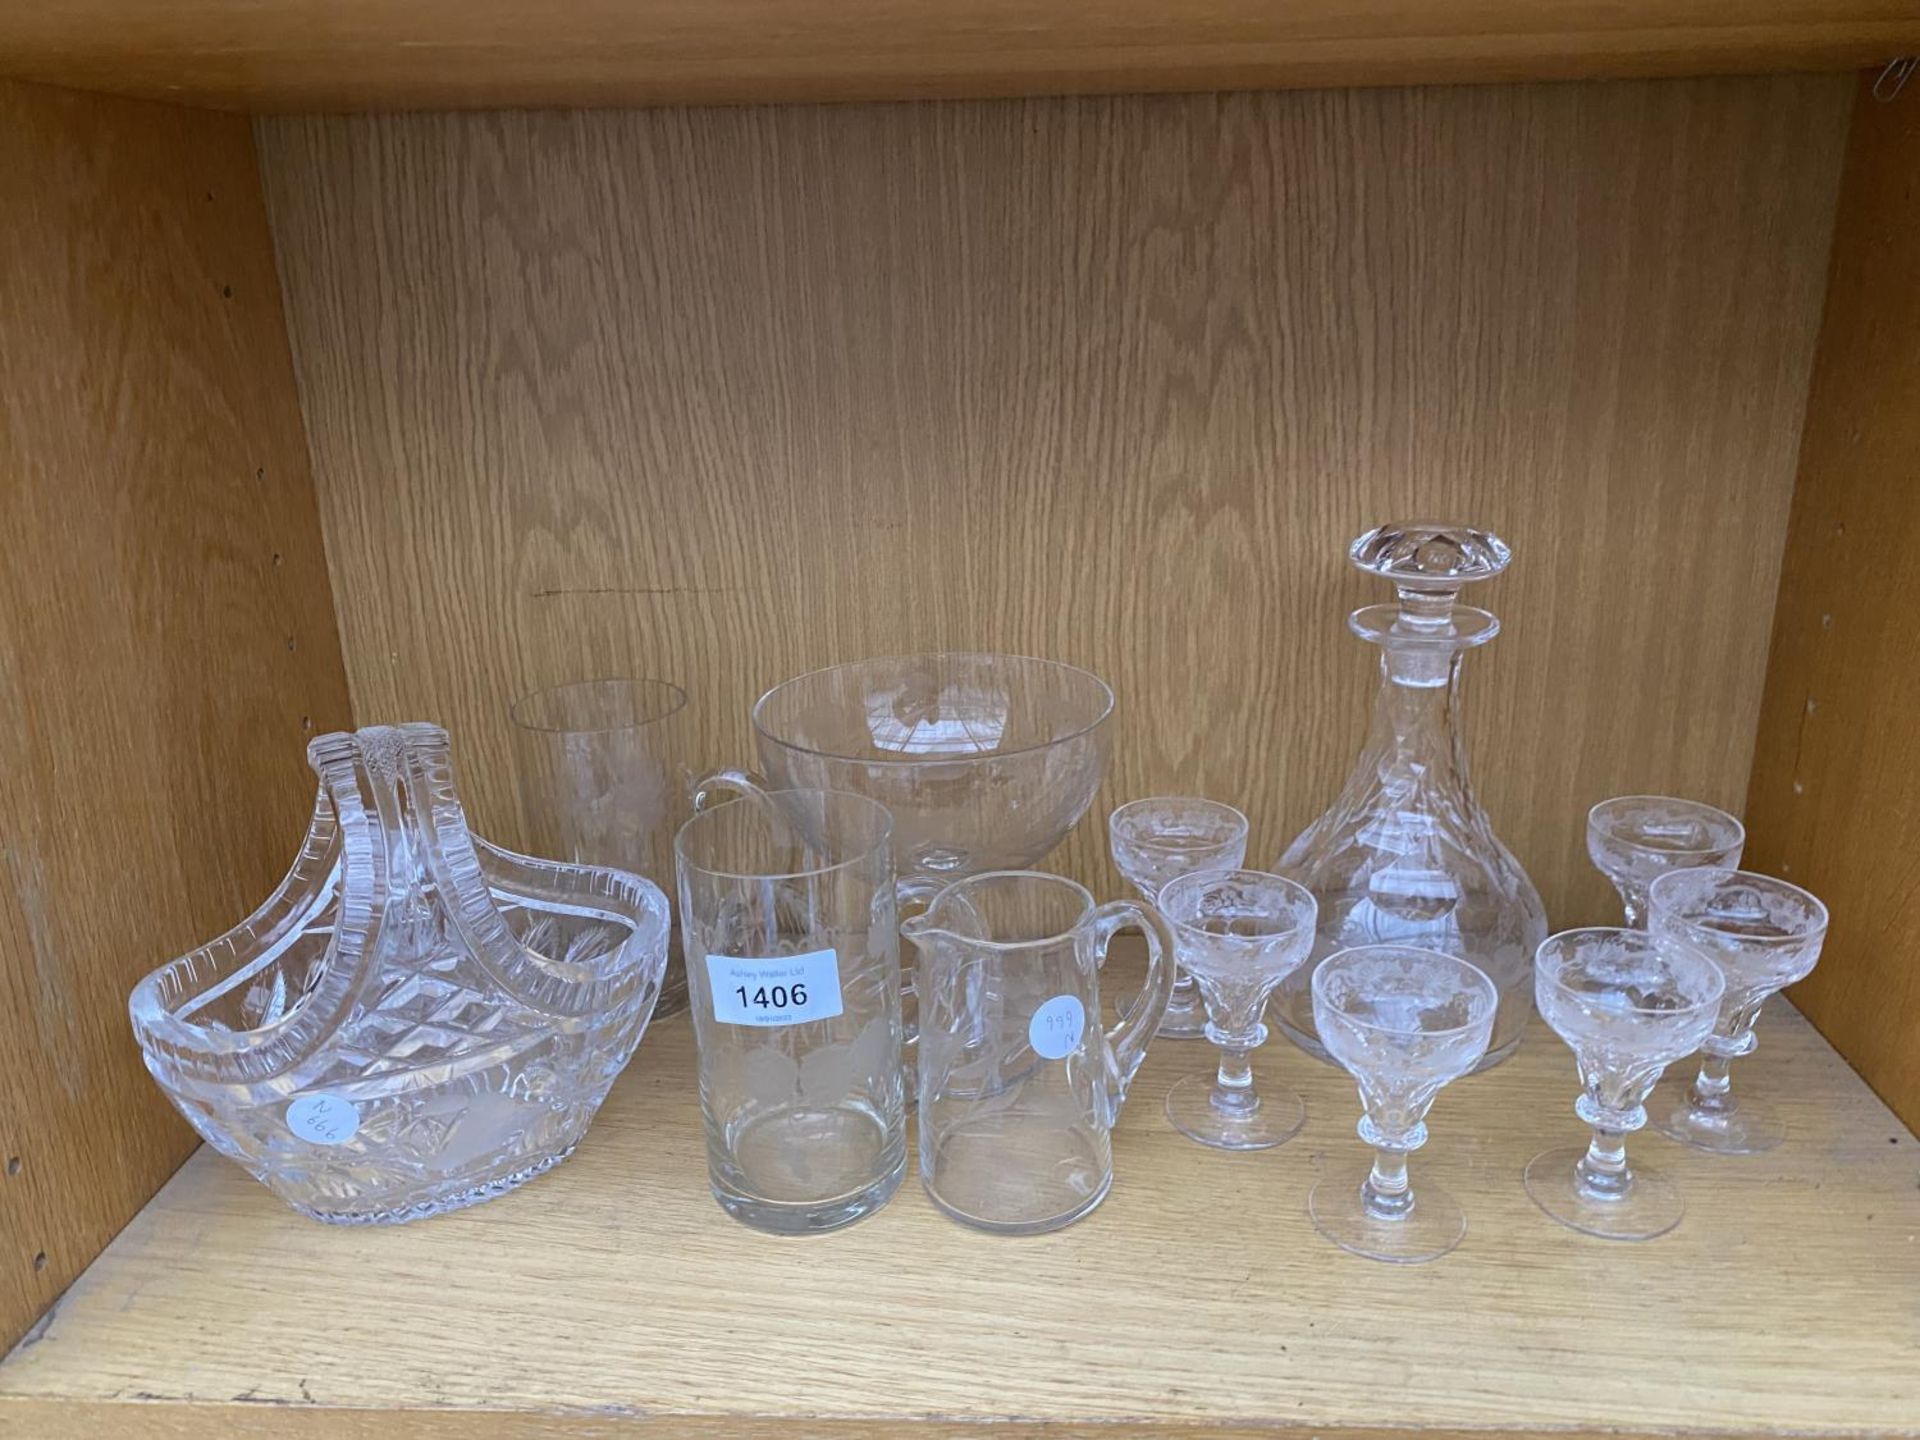 AN ASSORTMENT OF GLASS WARE TO INCLUDE A DECANTER, SHERRY GLASSES AND A POSIE BASKET ETC